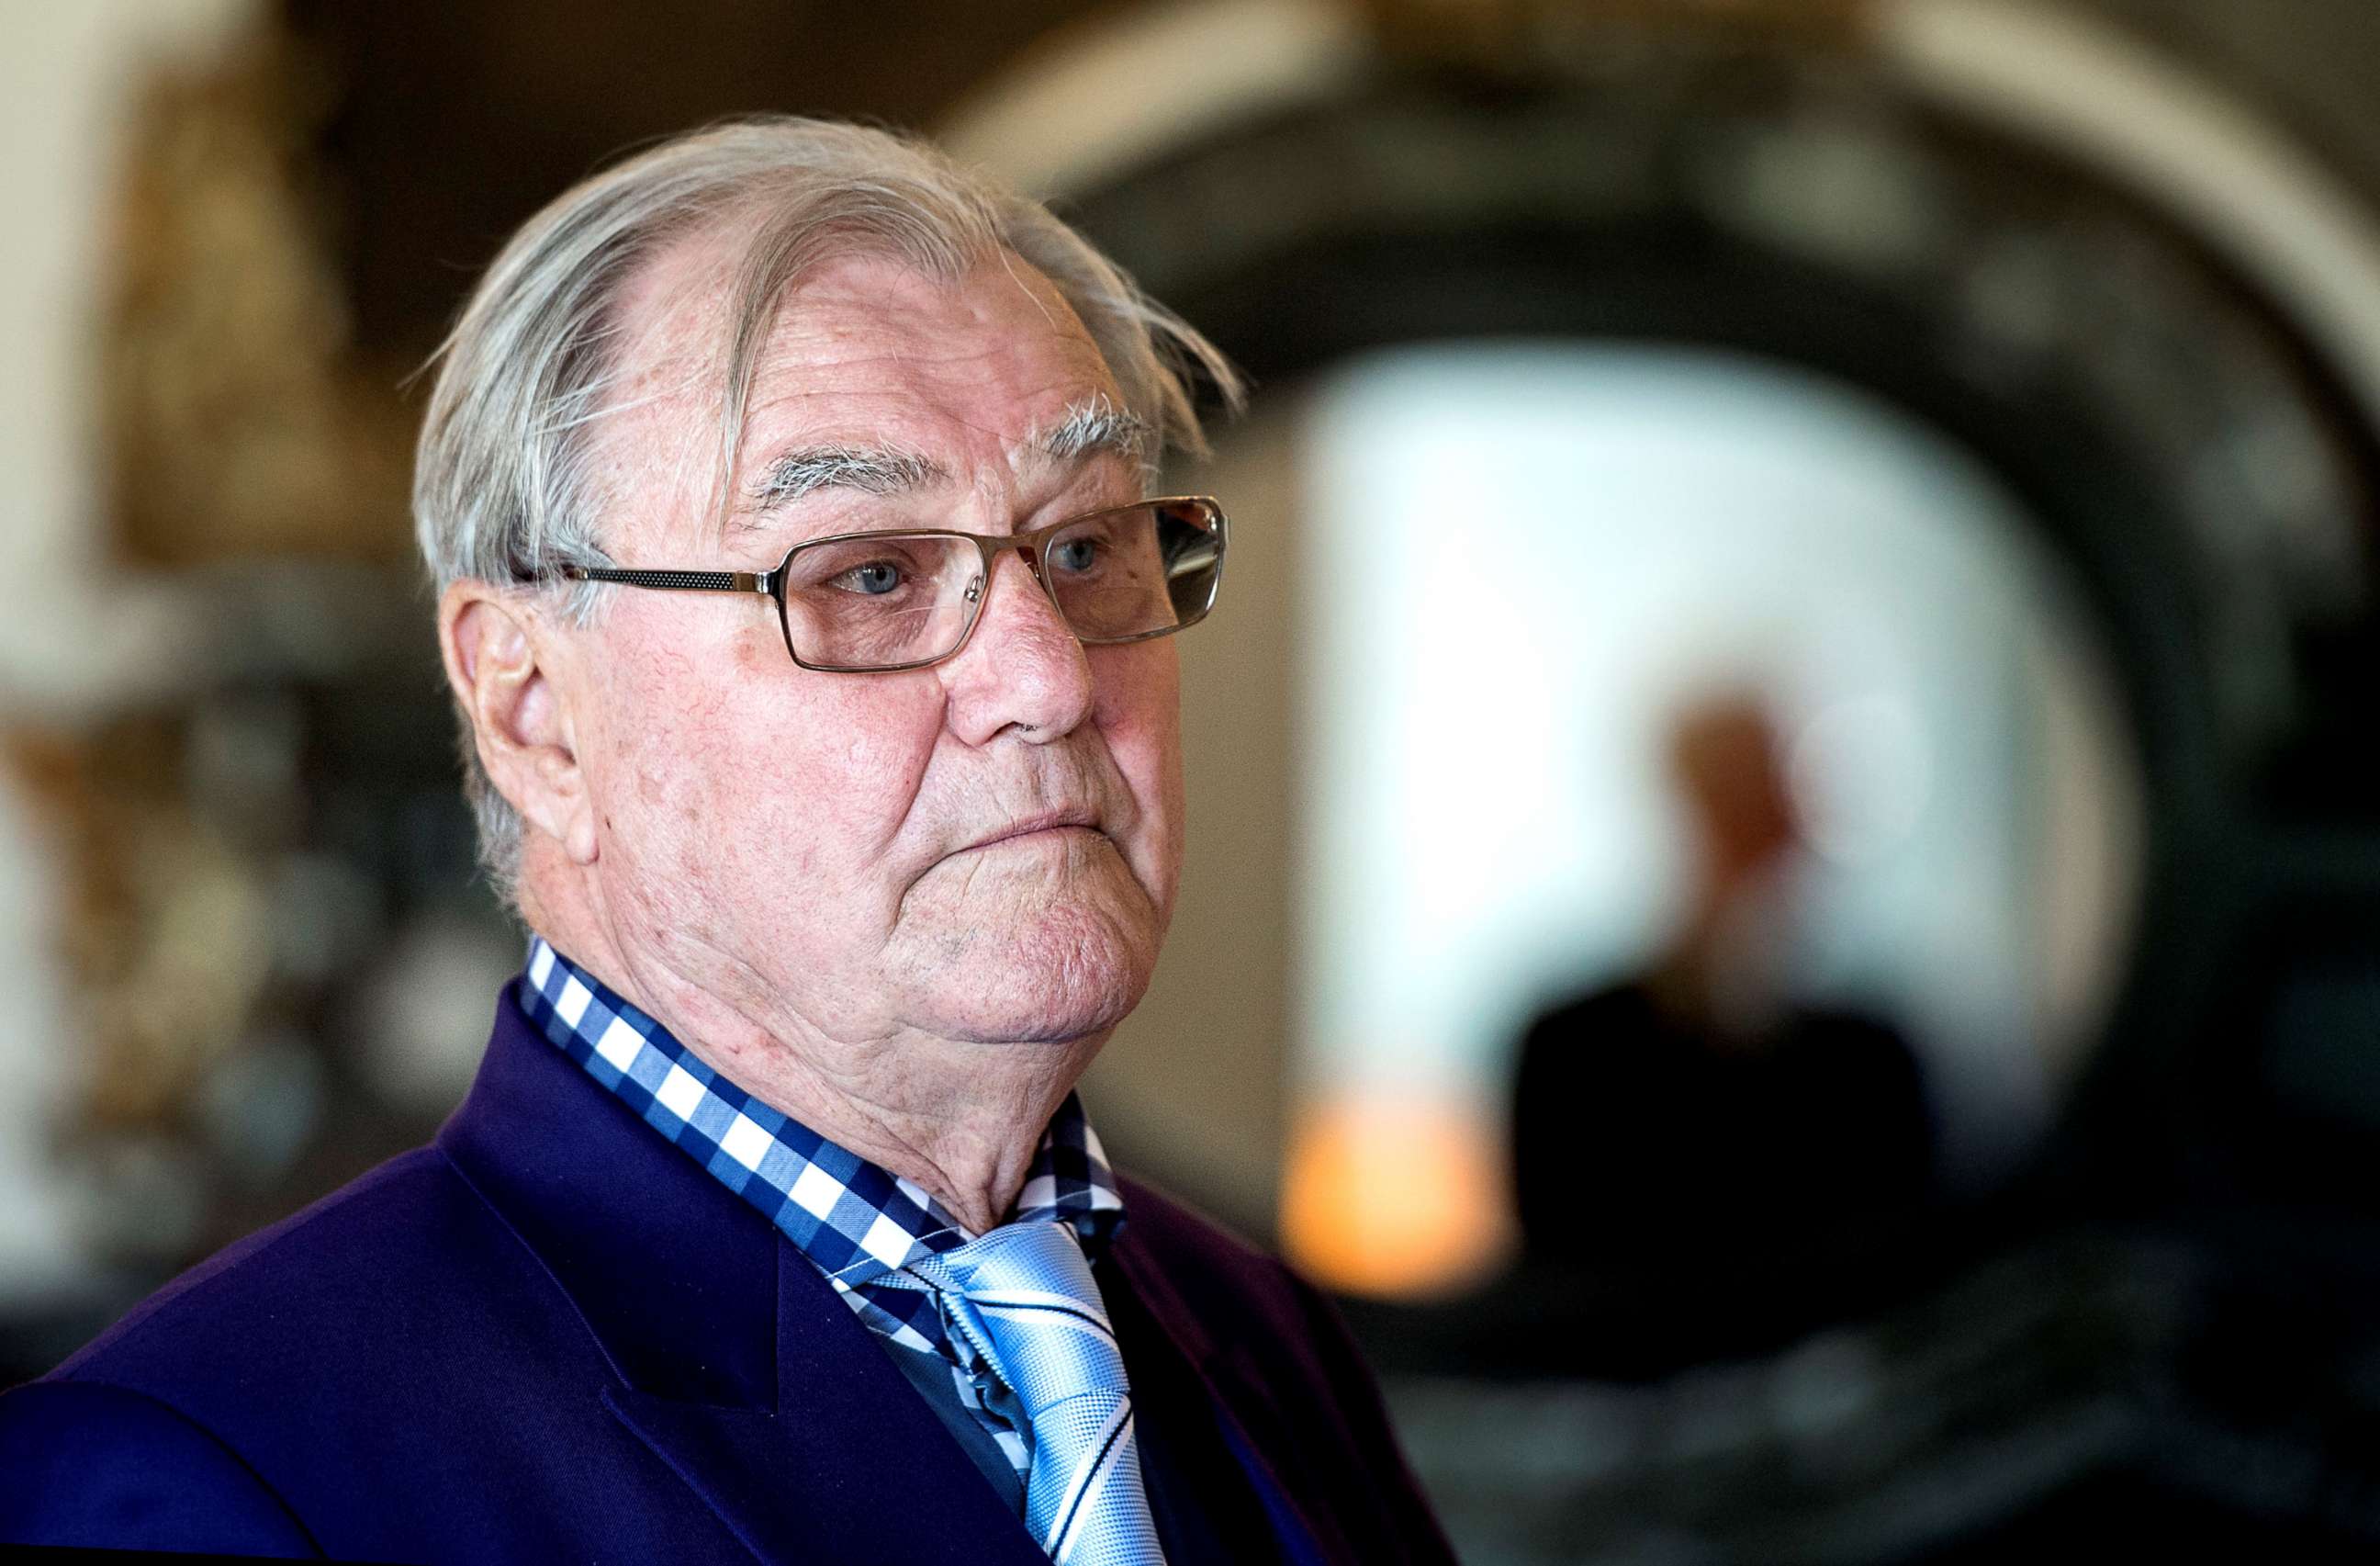 PHOTO: Danish Prince Consort Henrik is seen here in this 2014 file photo.